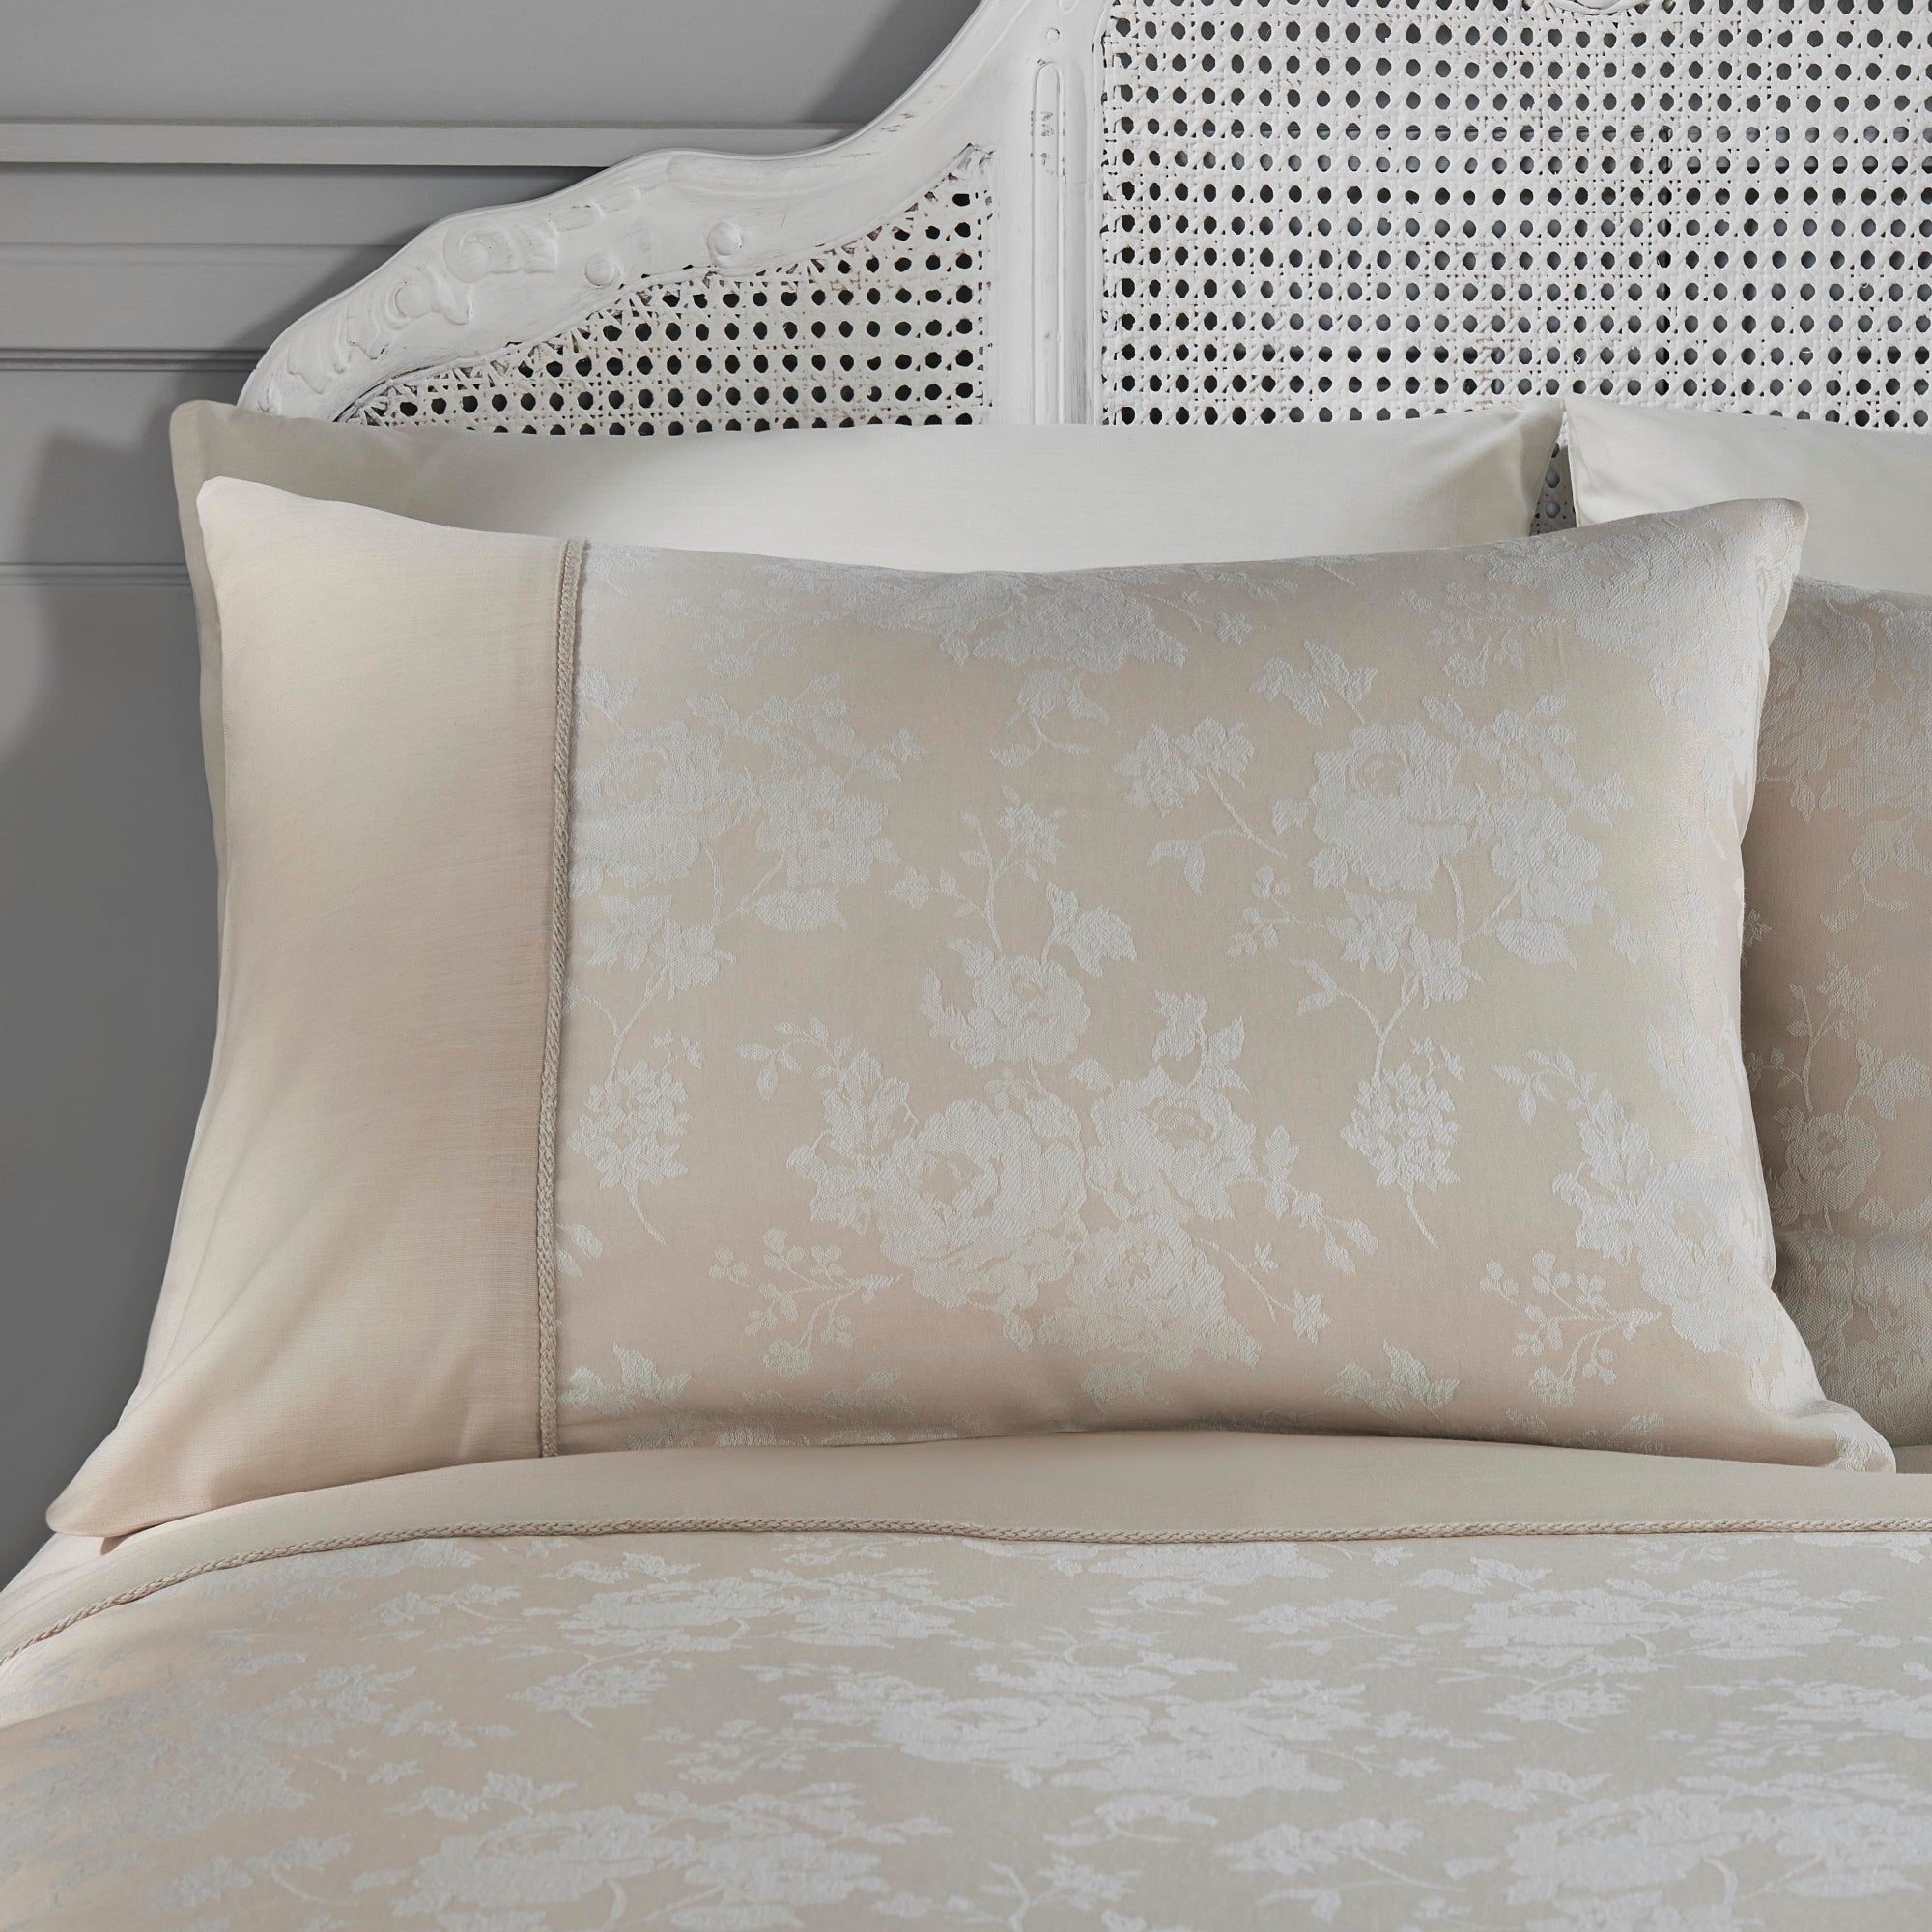 Duvet Cover Set Imelda by Dreams & Drapes Woven in Ivory